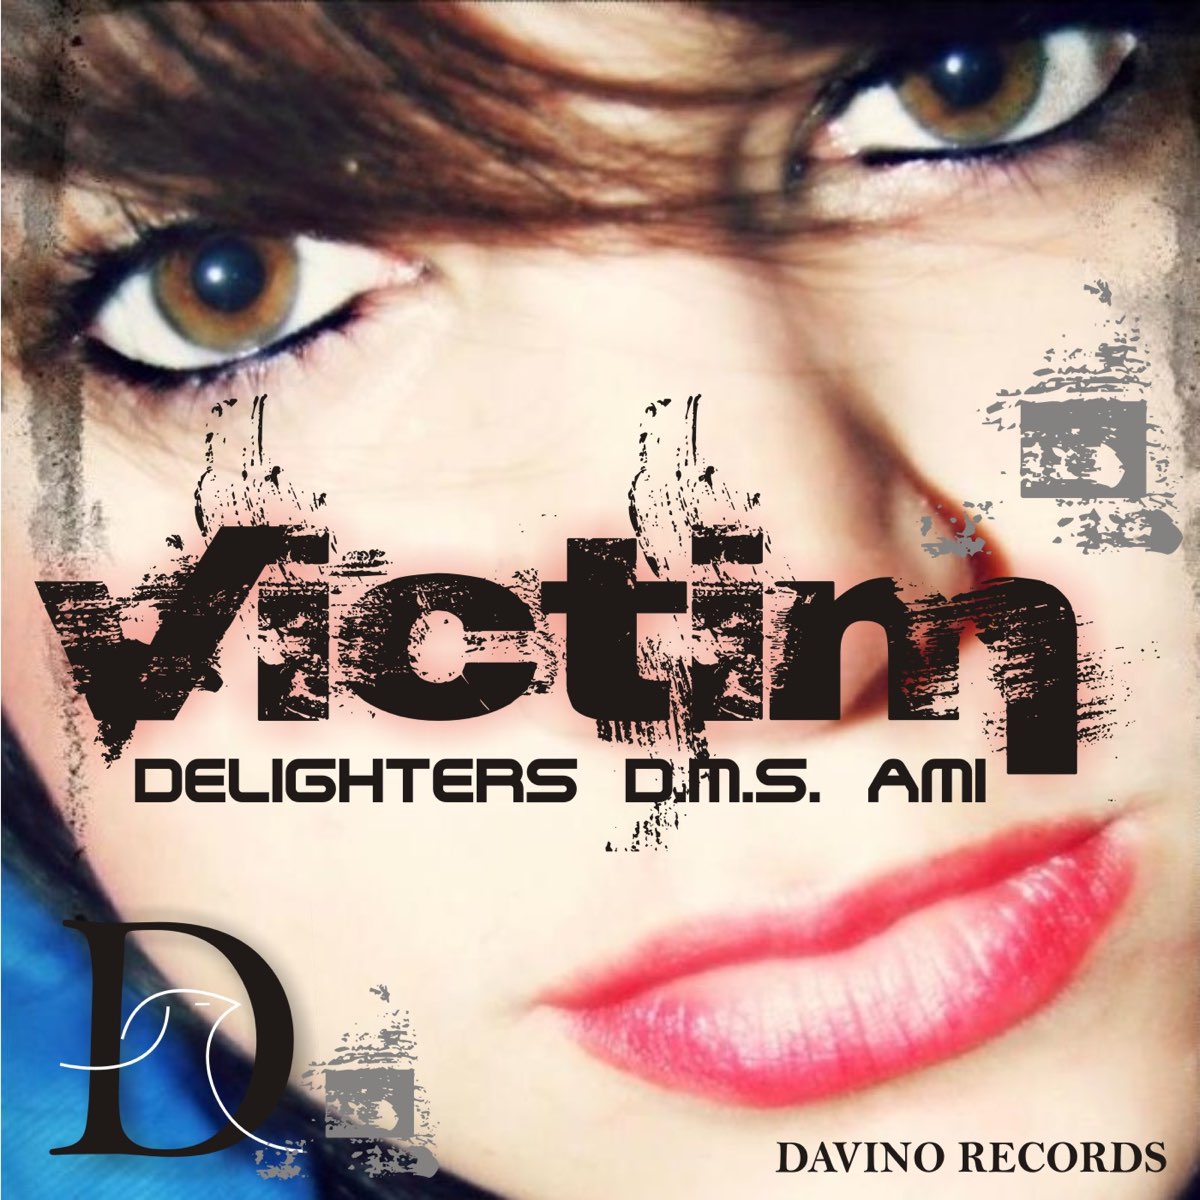 Текст песни victim. Delighters. Victim! (Feat. Flowerrboi). I am a victim of this Song.